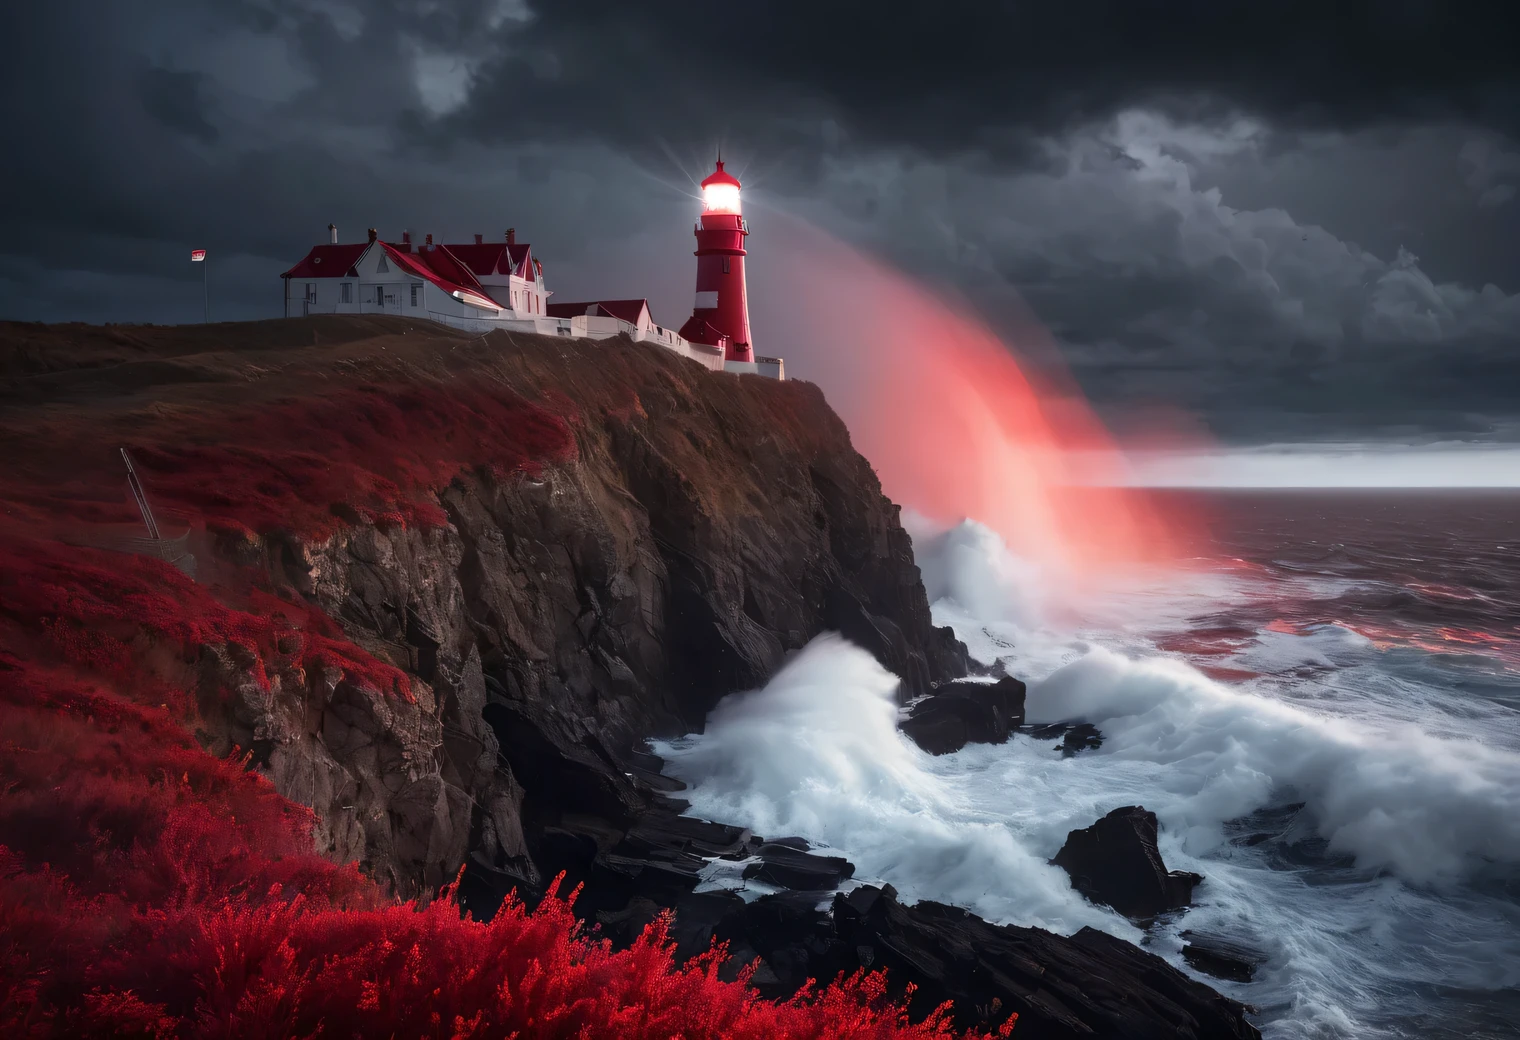 red art, Realistic painting in red tones., (fog:1.2), (the wind carries sea spray and foam:1.7), the dark a stormy sky is illuminated by the red light of the lighthouse, Double exposure effect, (1 Lighthouse on the edge of a cliff:1.5 glows red:1.3505), sea, Strong (a storm:1.3050), a stormy wind:1.250), red backlight, (ray tracing:1.2), (Tyndall effect:1.4055 lighthouse beams:1.4), High detail, a storm haze, Texture smoothing, outline blur, red palette